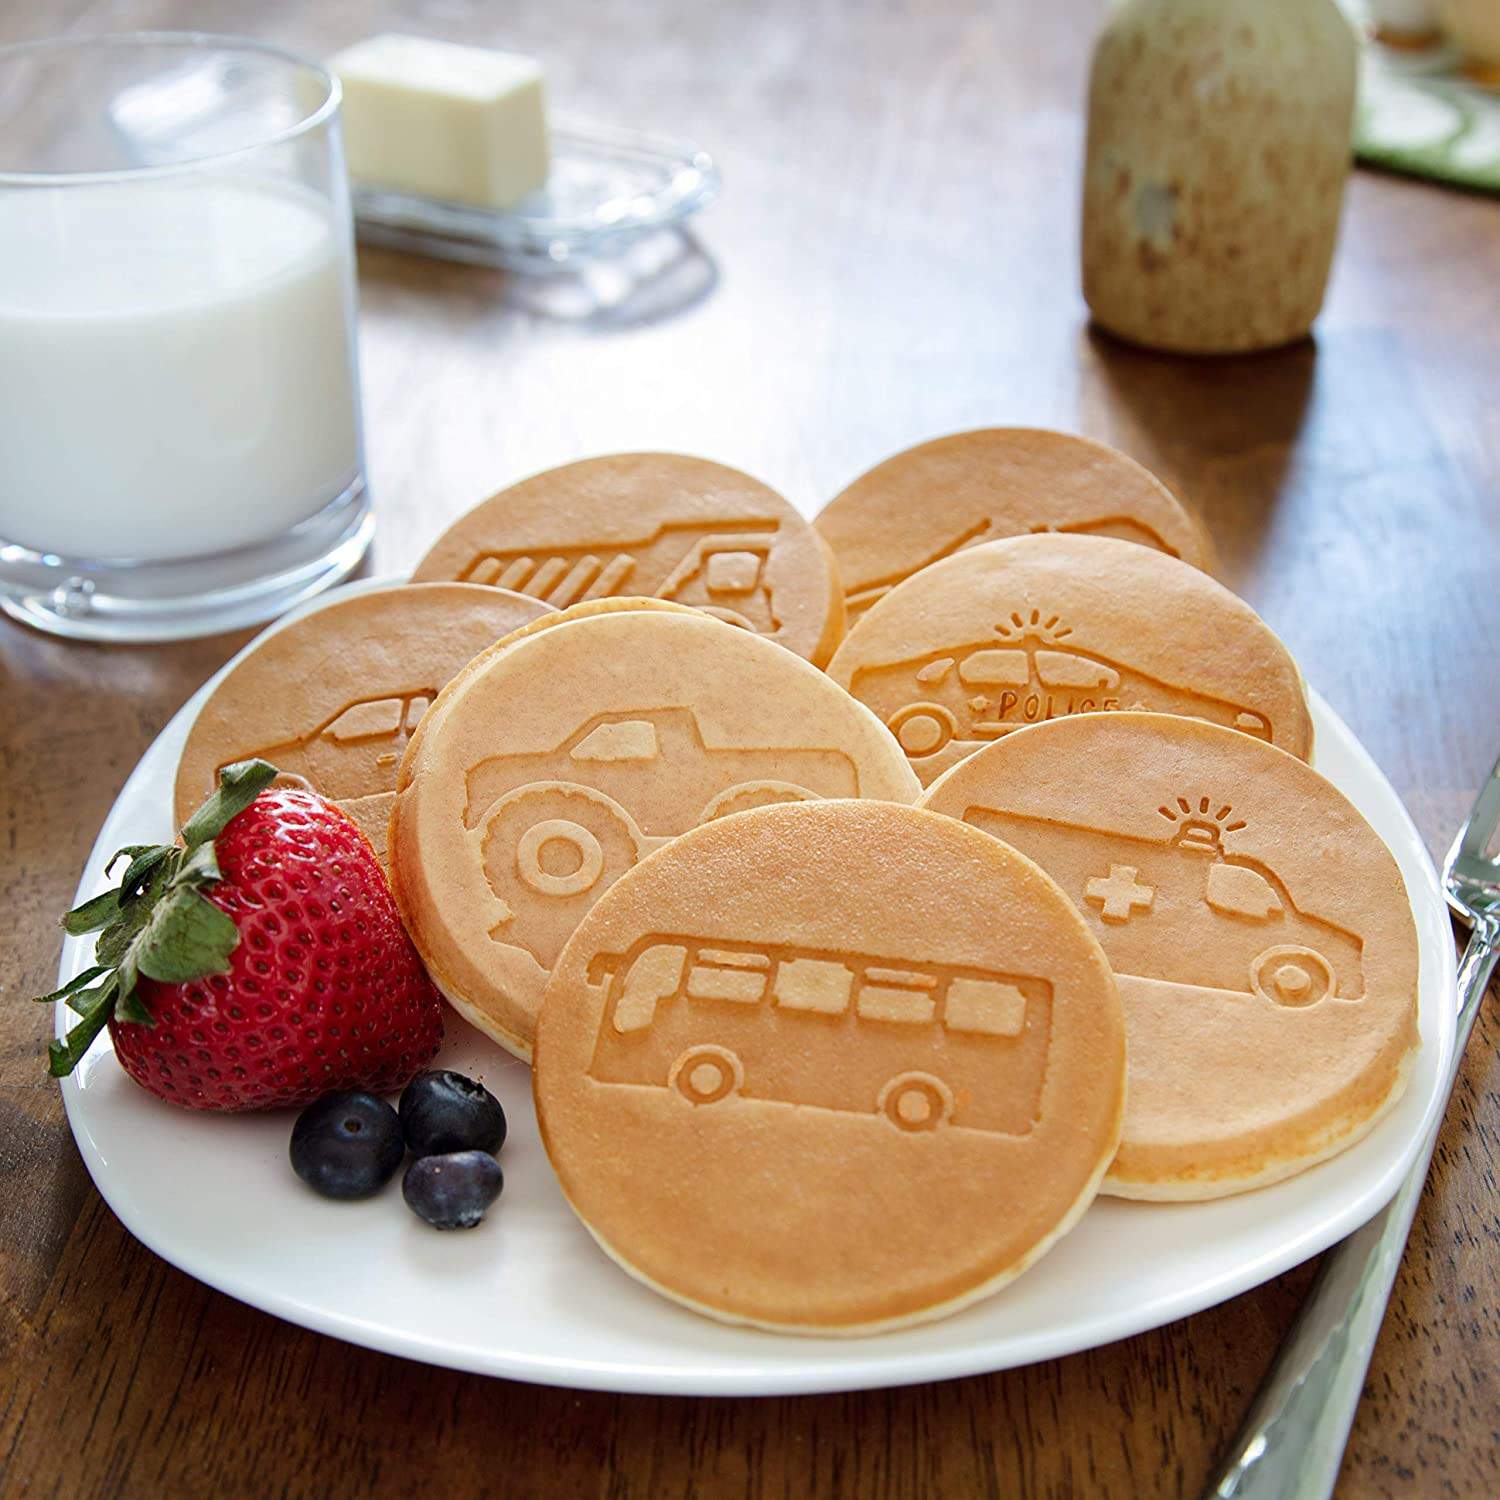 Waffle Wow! Construction Trucks Mini Waffle Maker - Make 7 Different Vehicle Shaped Pancakes Featuring A Bulldozer Forklift & More- Elect